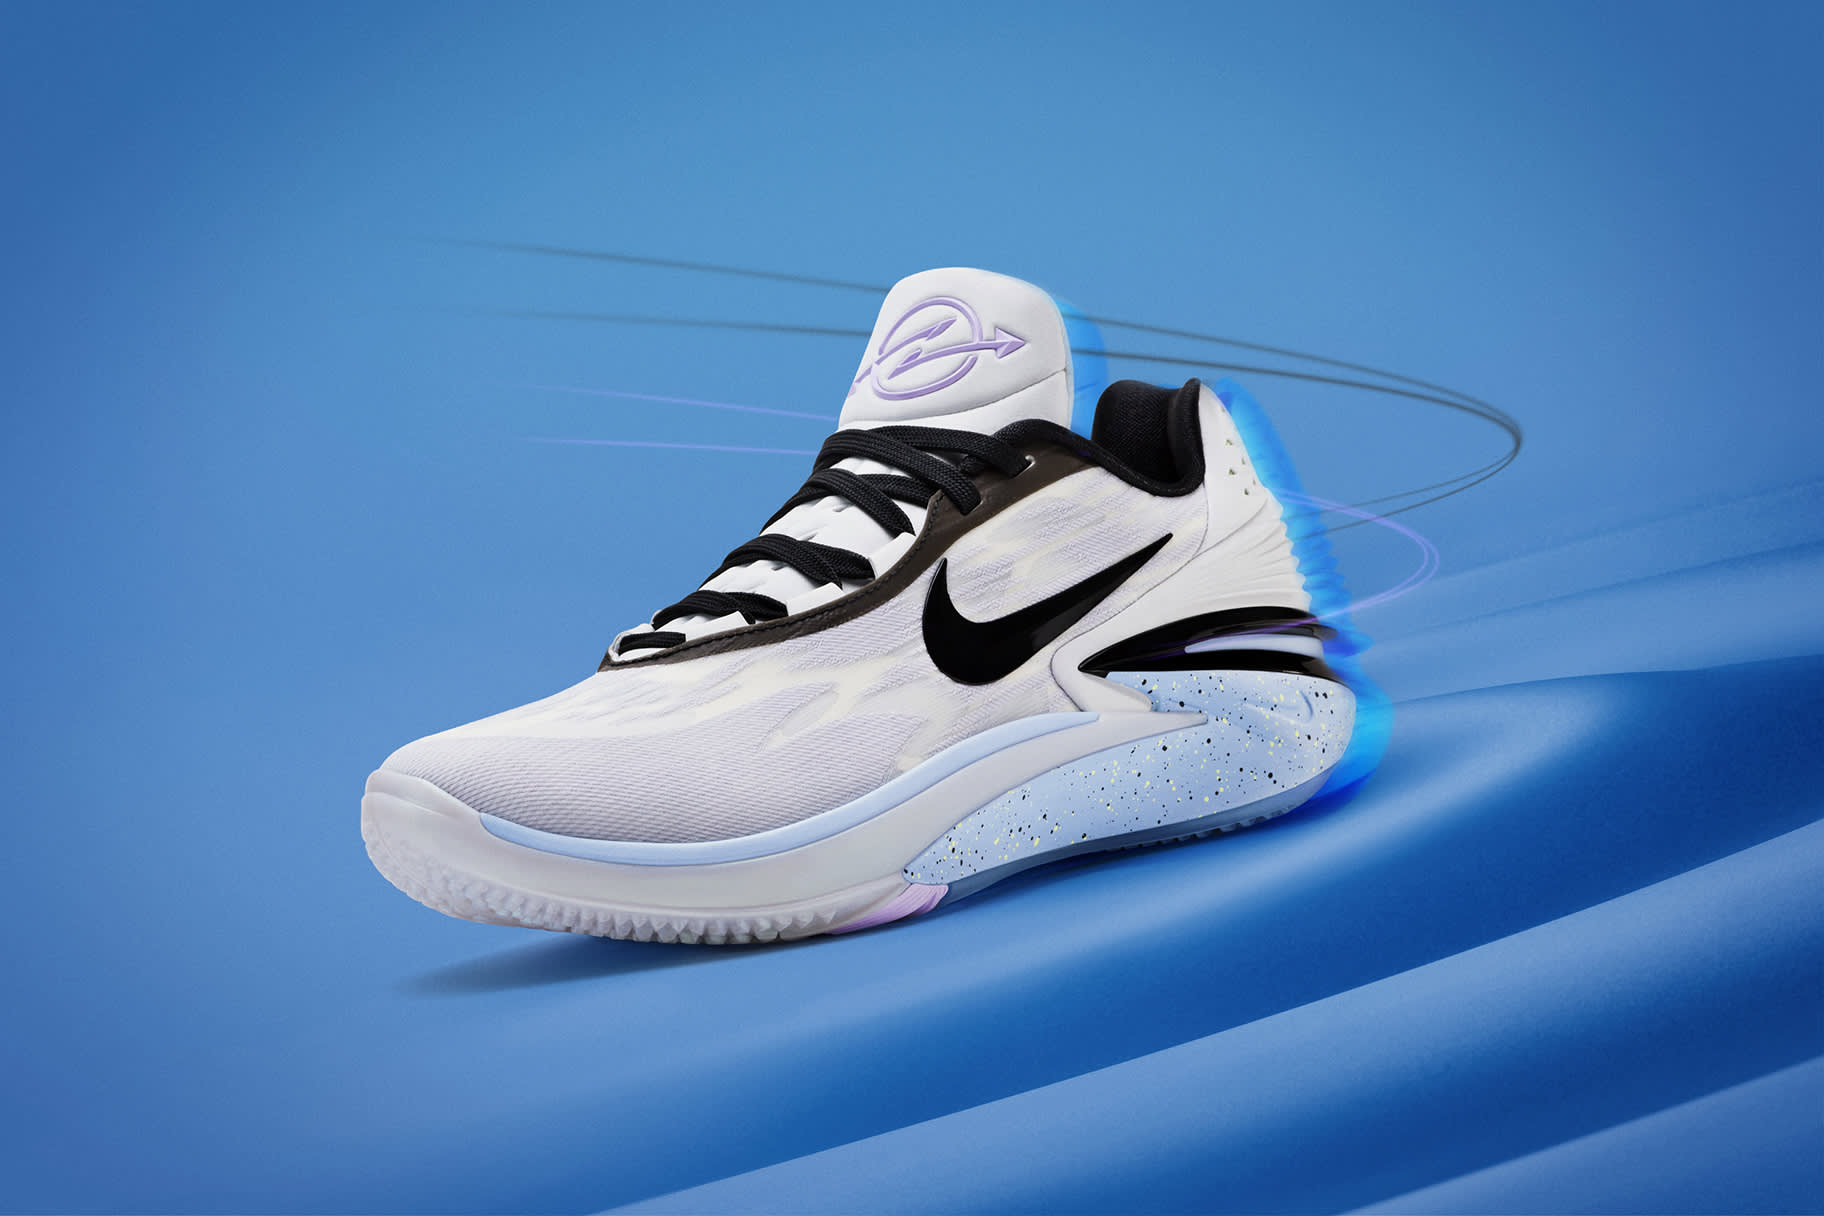 The next leap in basketball innovation: Air Zoom G.T. Cut 2